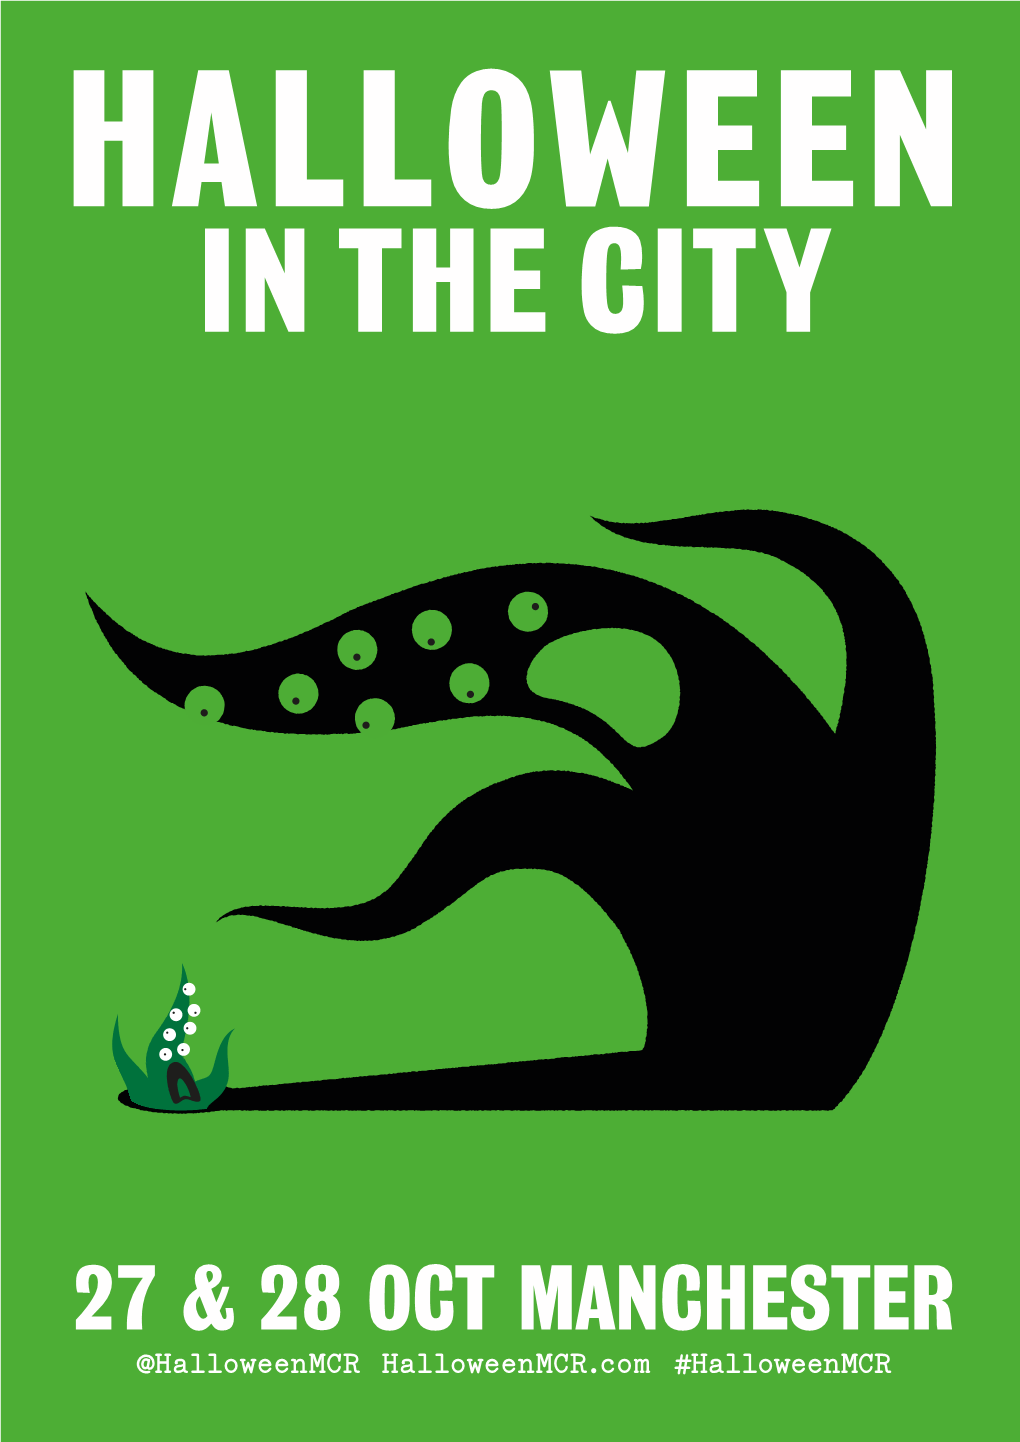 Halloween in the City Flyer.Pdf